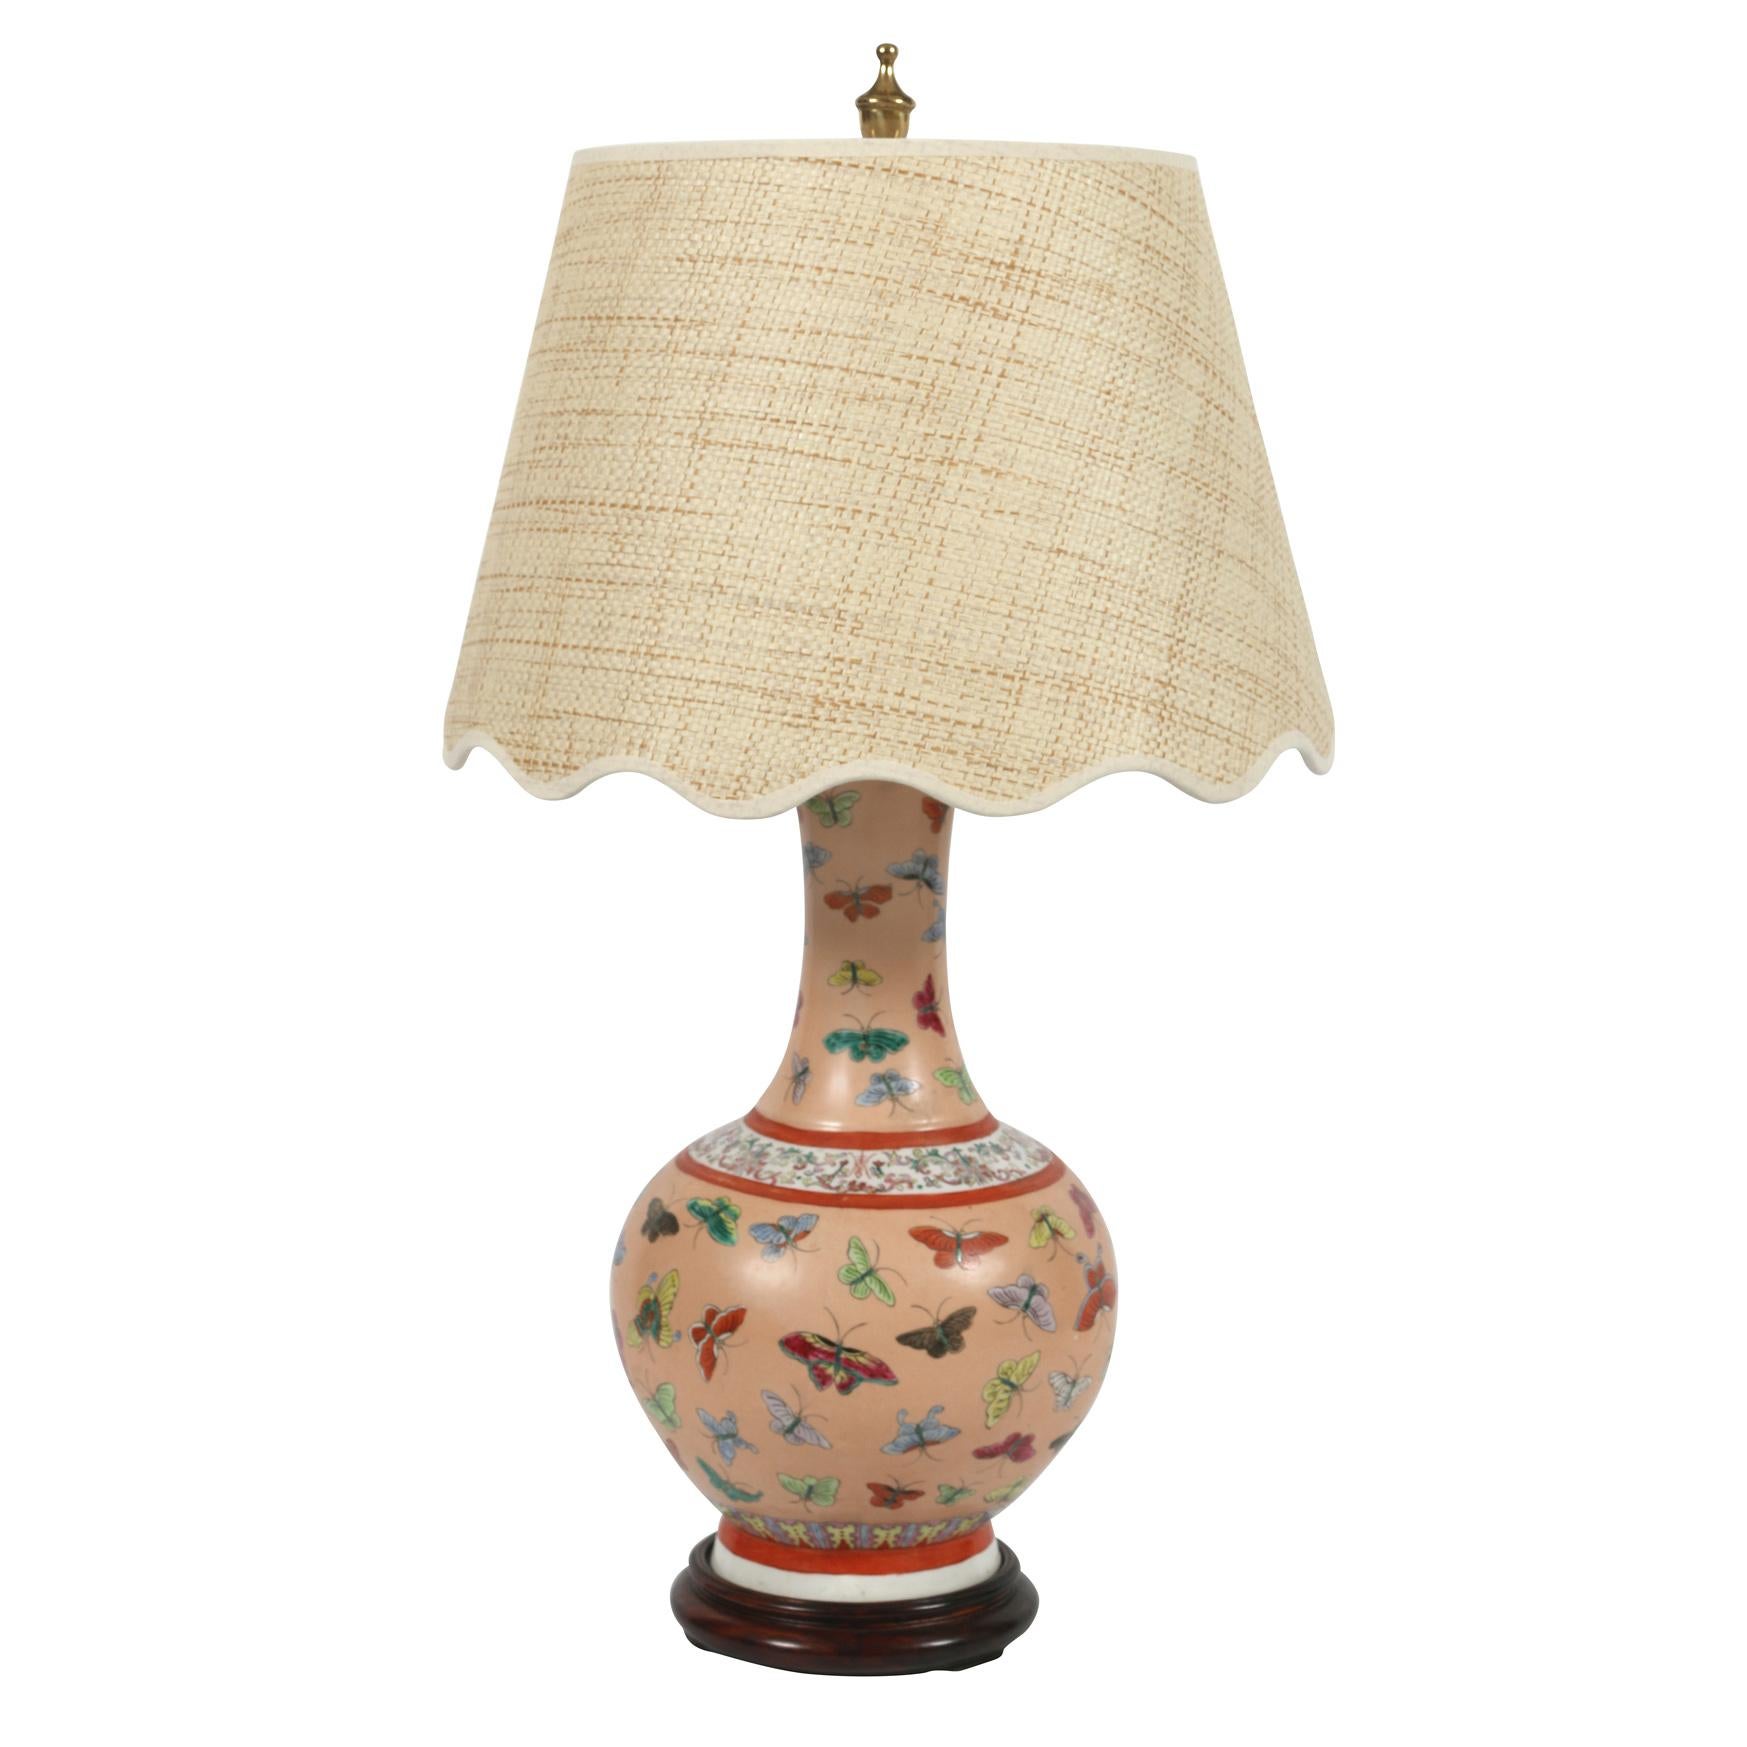 Pair of Chinese porcelain lamps with colorful butterflies on a pink background.